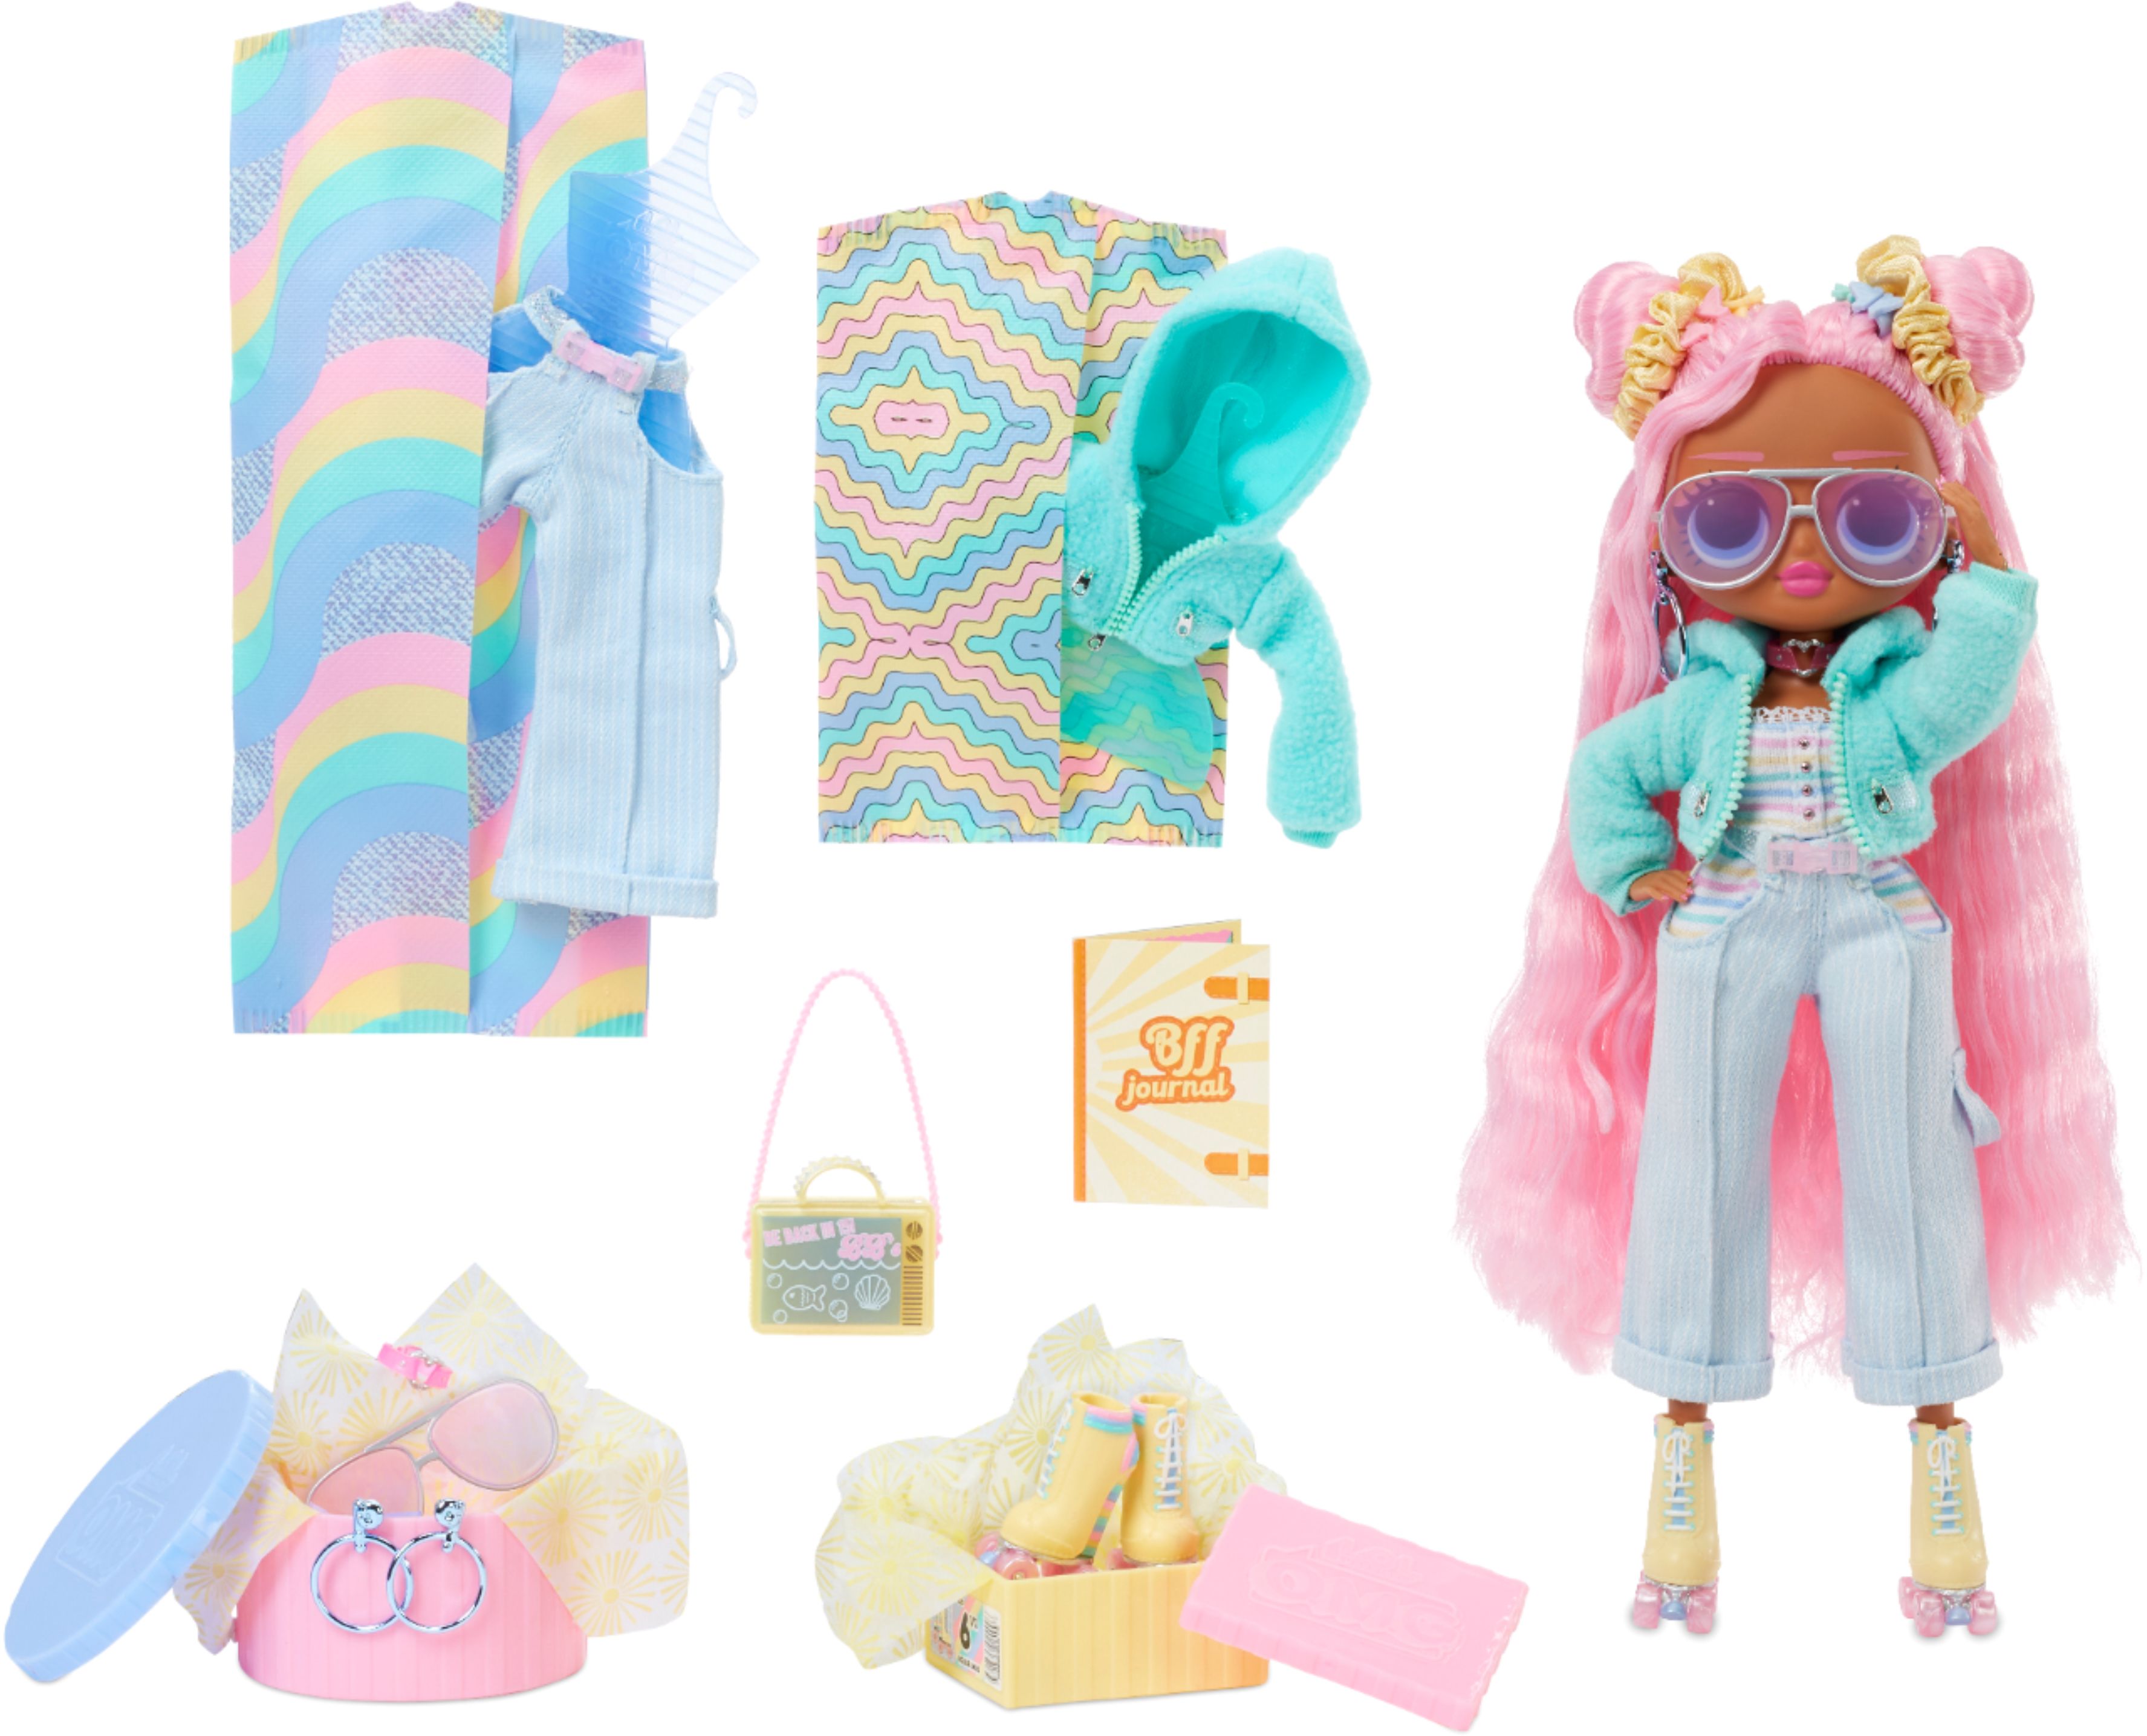 L.O.L. Surprise! O.M.G. Fashion Doll Styles May Vary 559788 - Best Buy